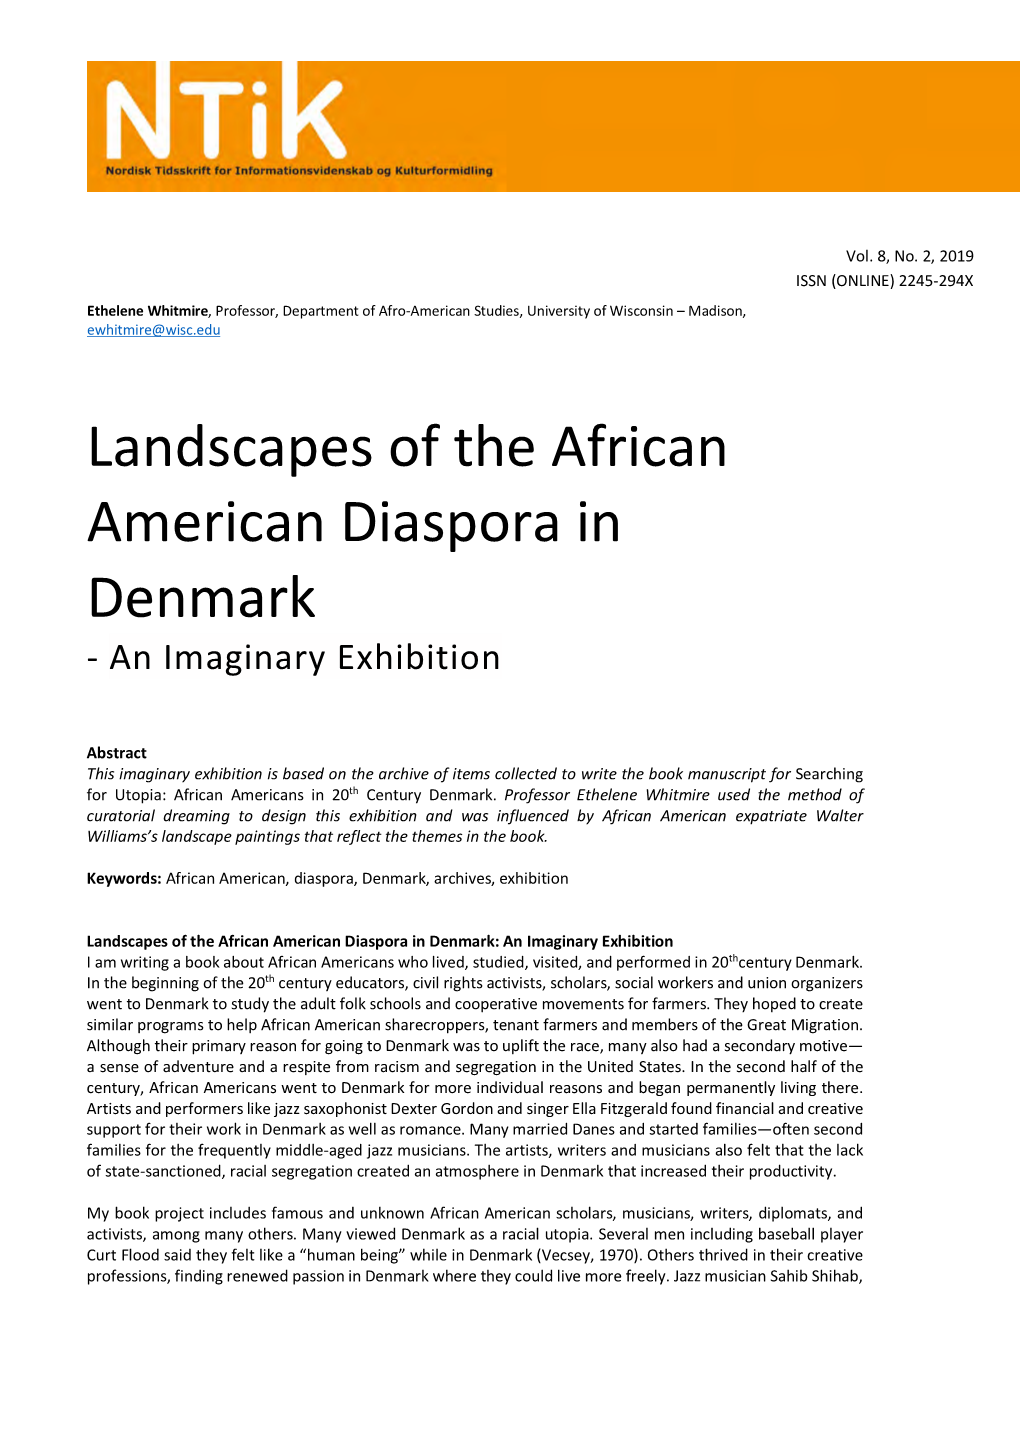 Landscapes of the African American Diaspora in Denmark - an Imaginary Exhibition